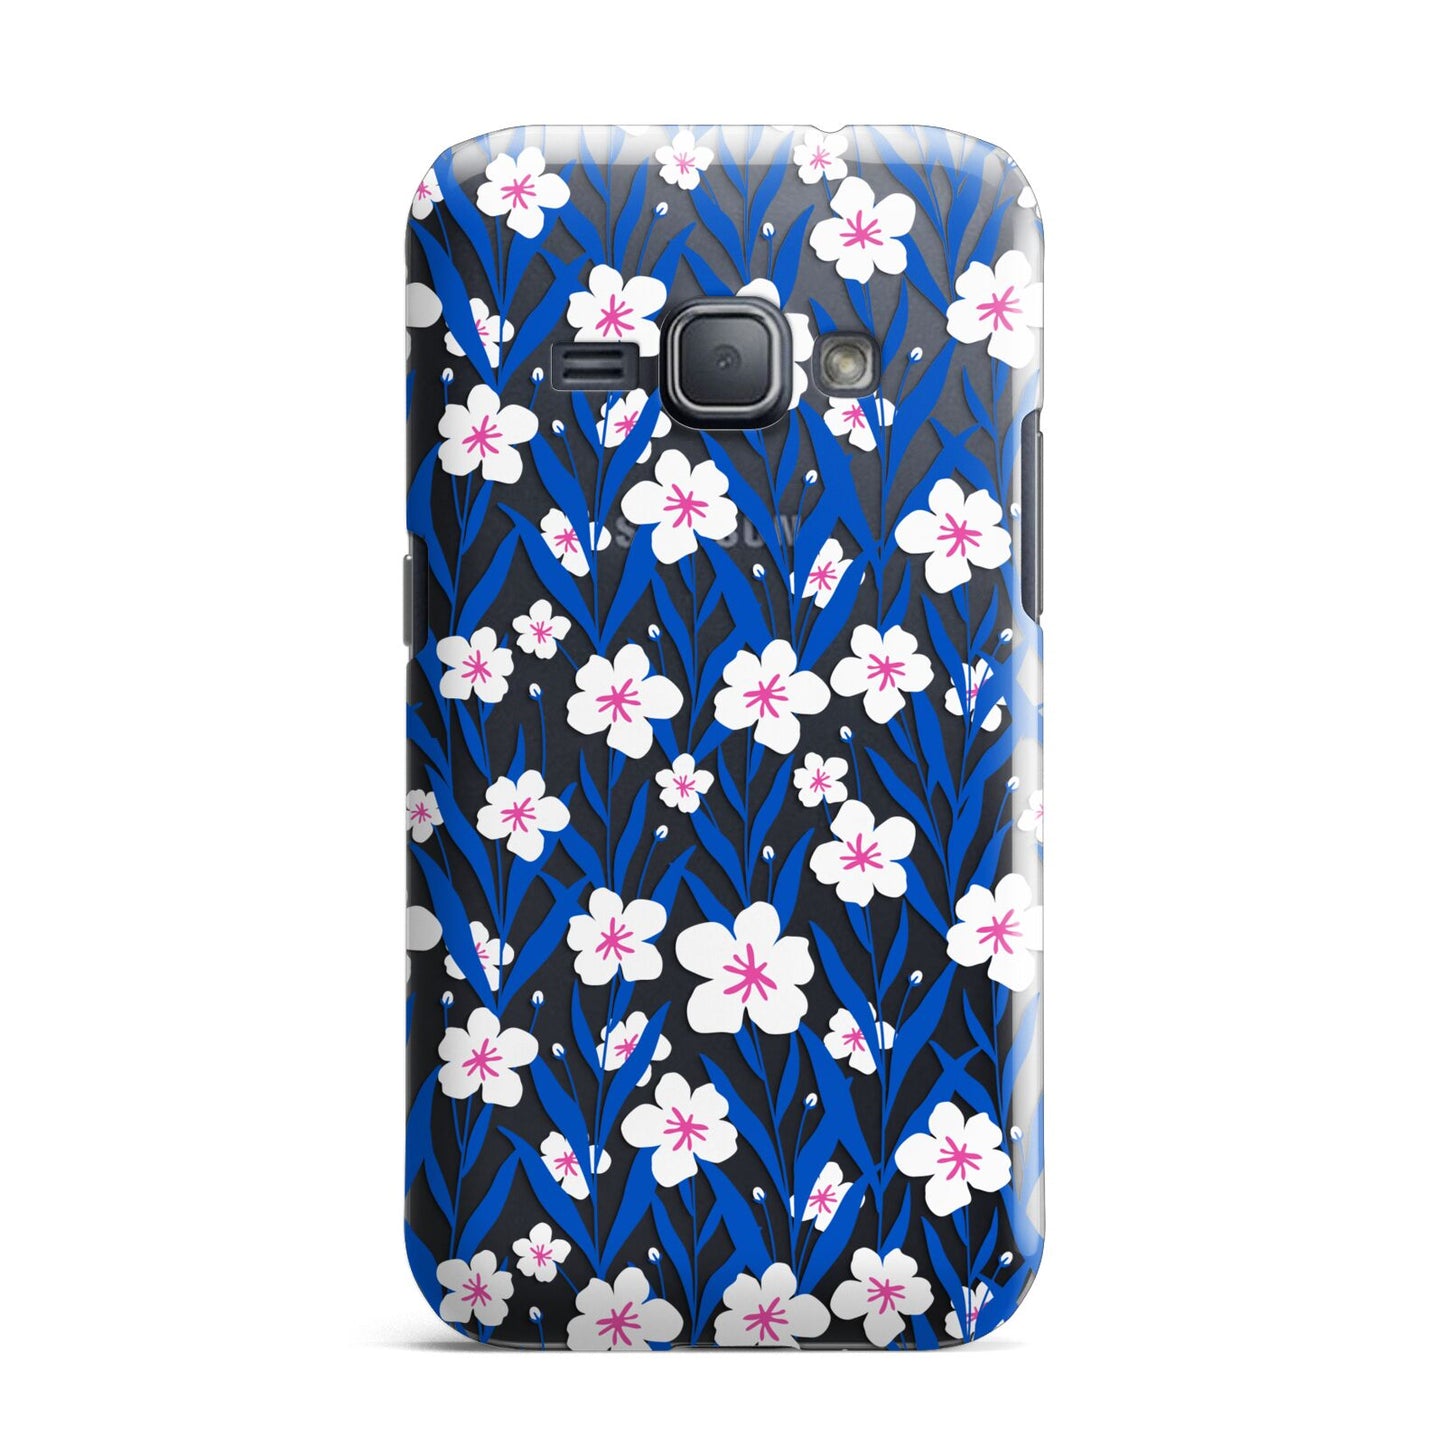 Blue and White Flowers Samsung Galaxy J1 2016 Case